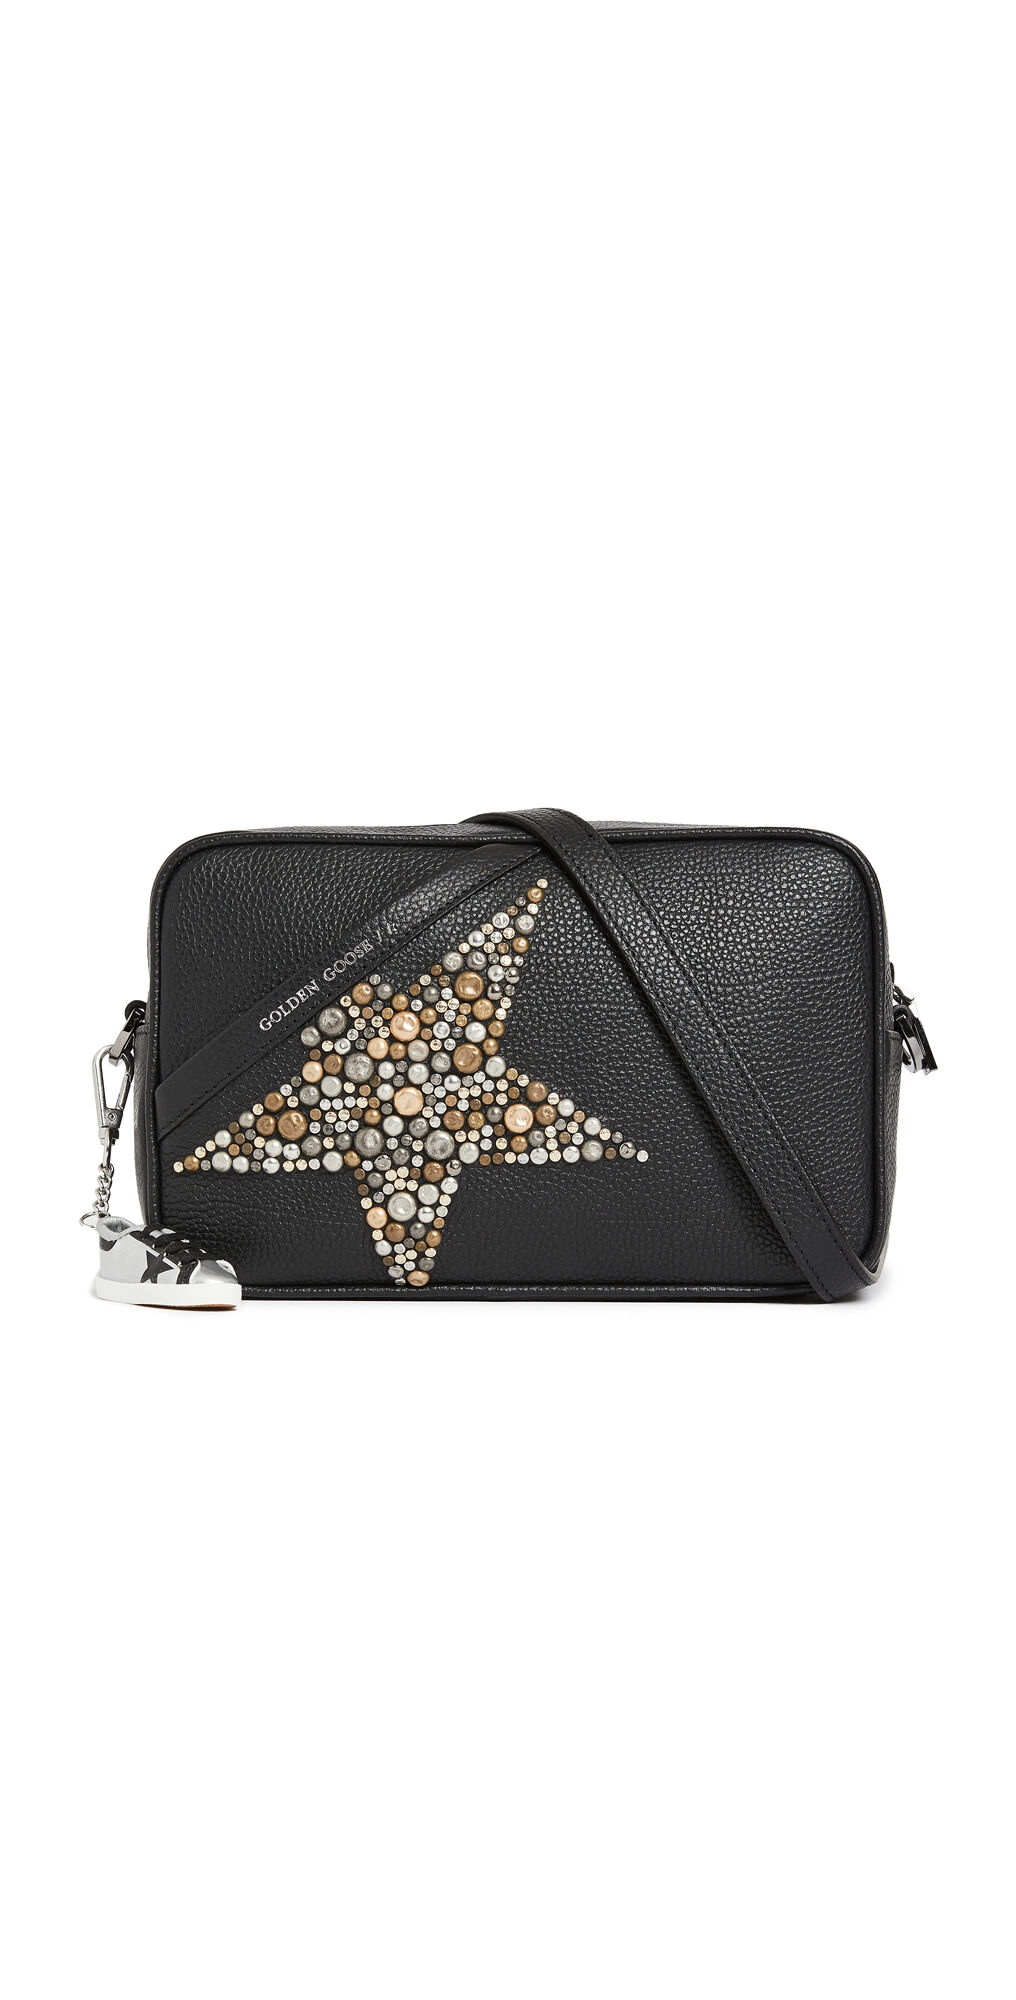 Golden Goose Star Bag Black/Silver One Size  Black/Silver  size:One Size